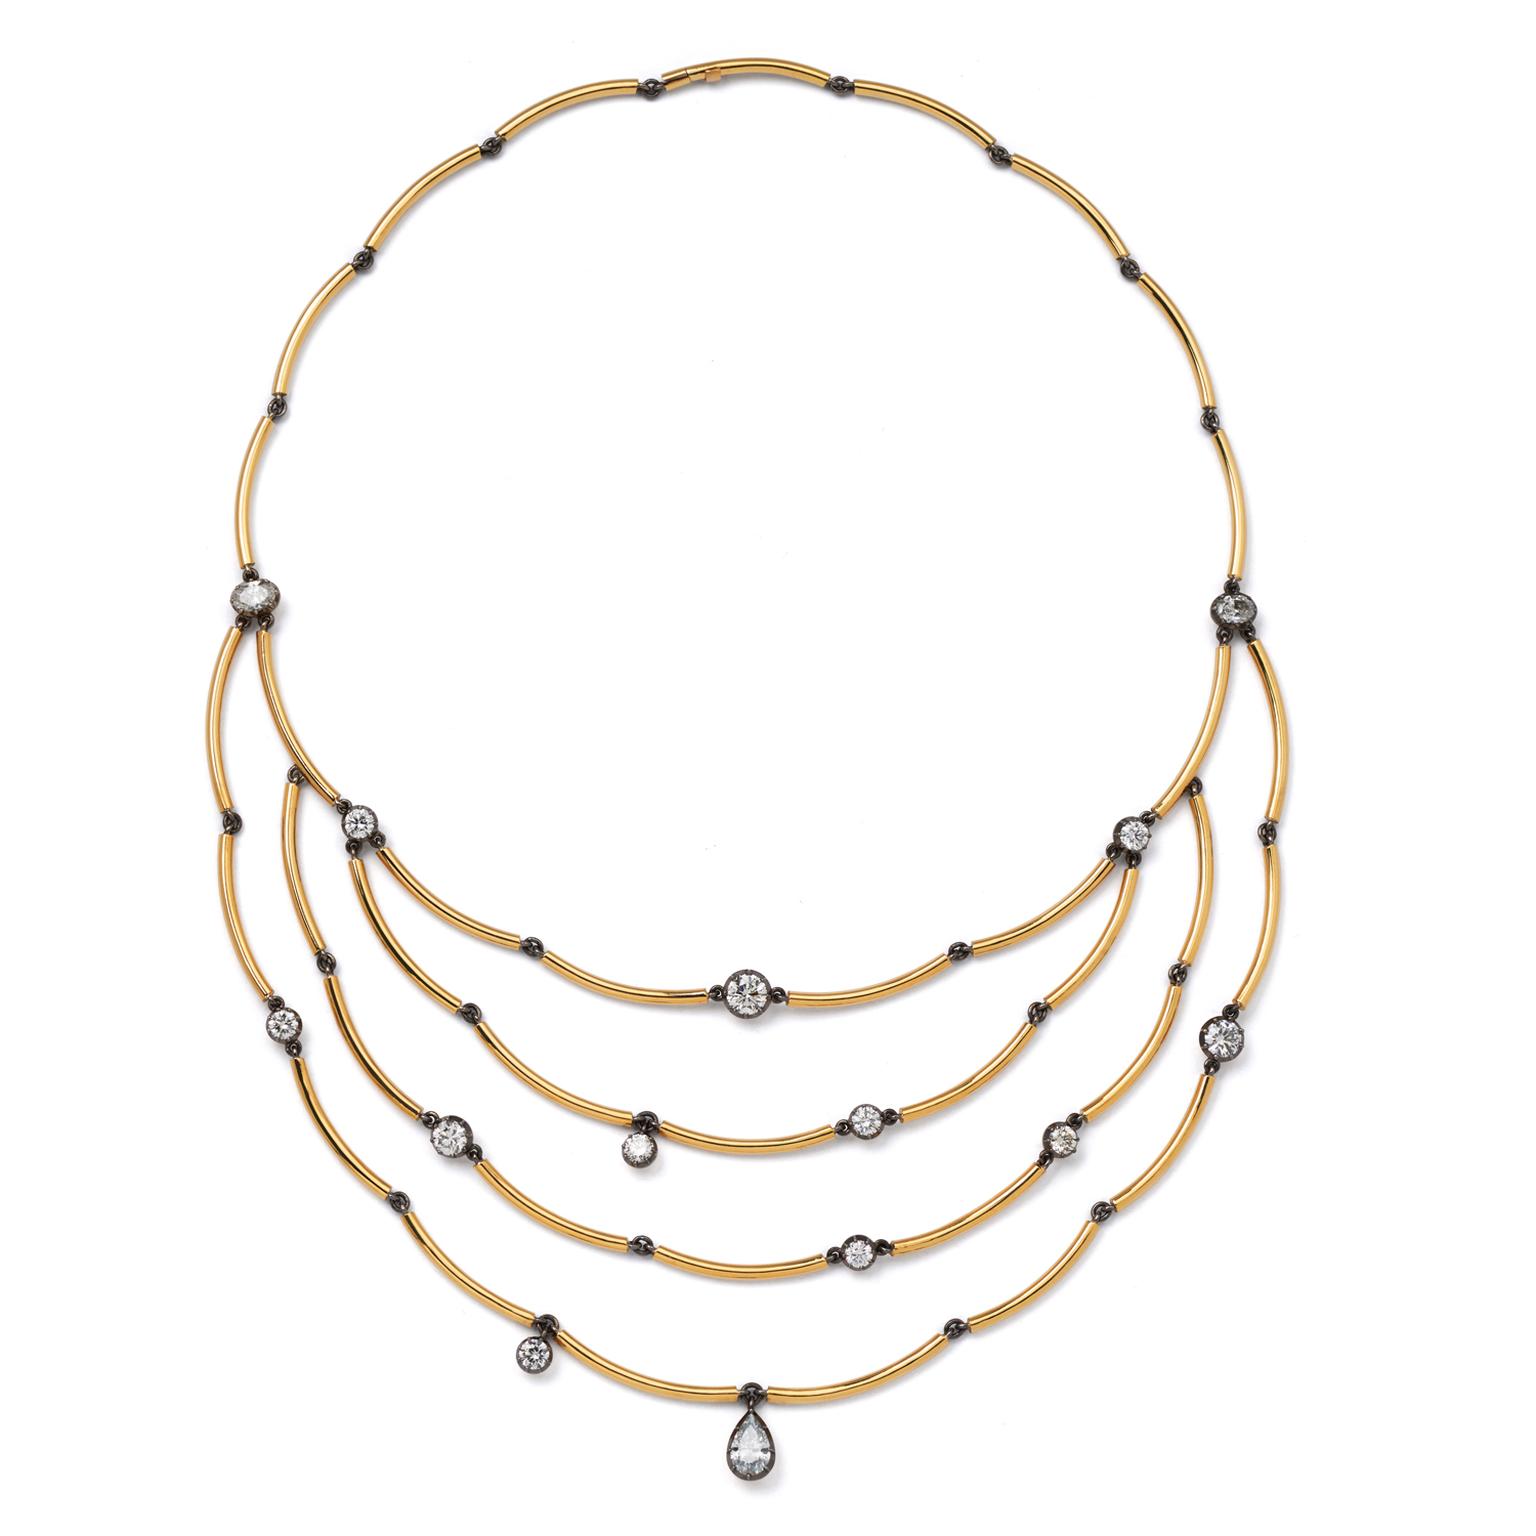 Jessica McCormack Chi Chi gold and diamond necklace